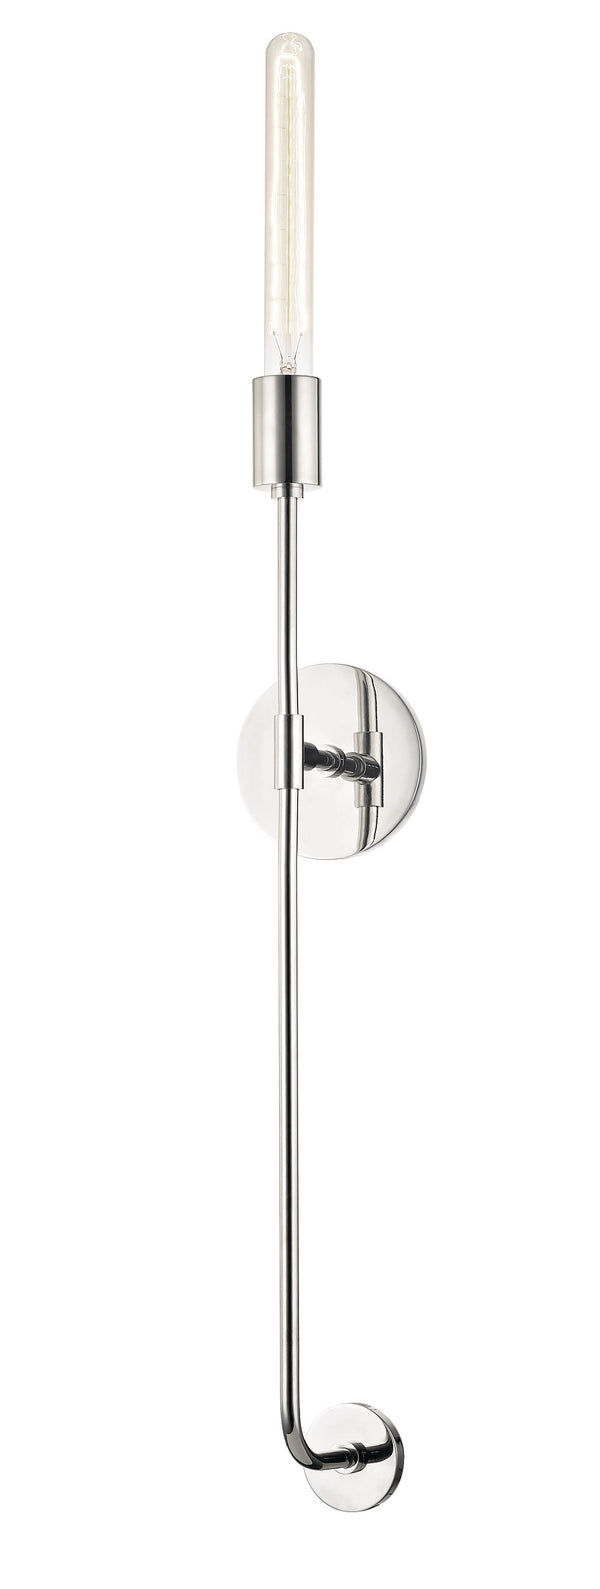 Lighting - Wall Sconce Dylan 1 Light Wall Sconce // Polished Nickel 